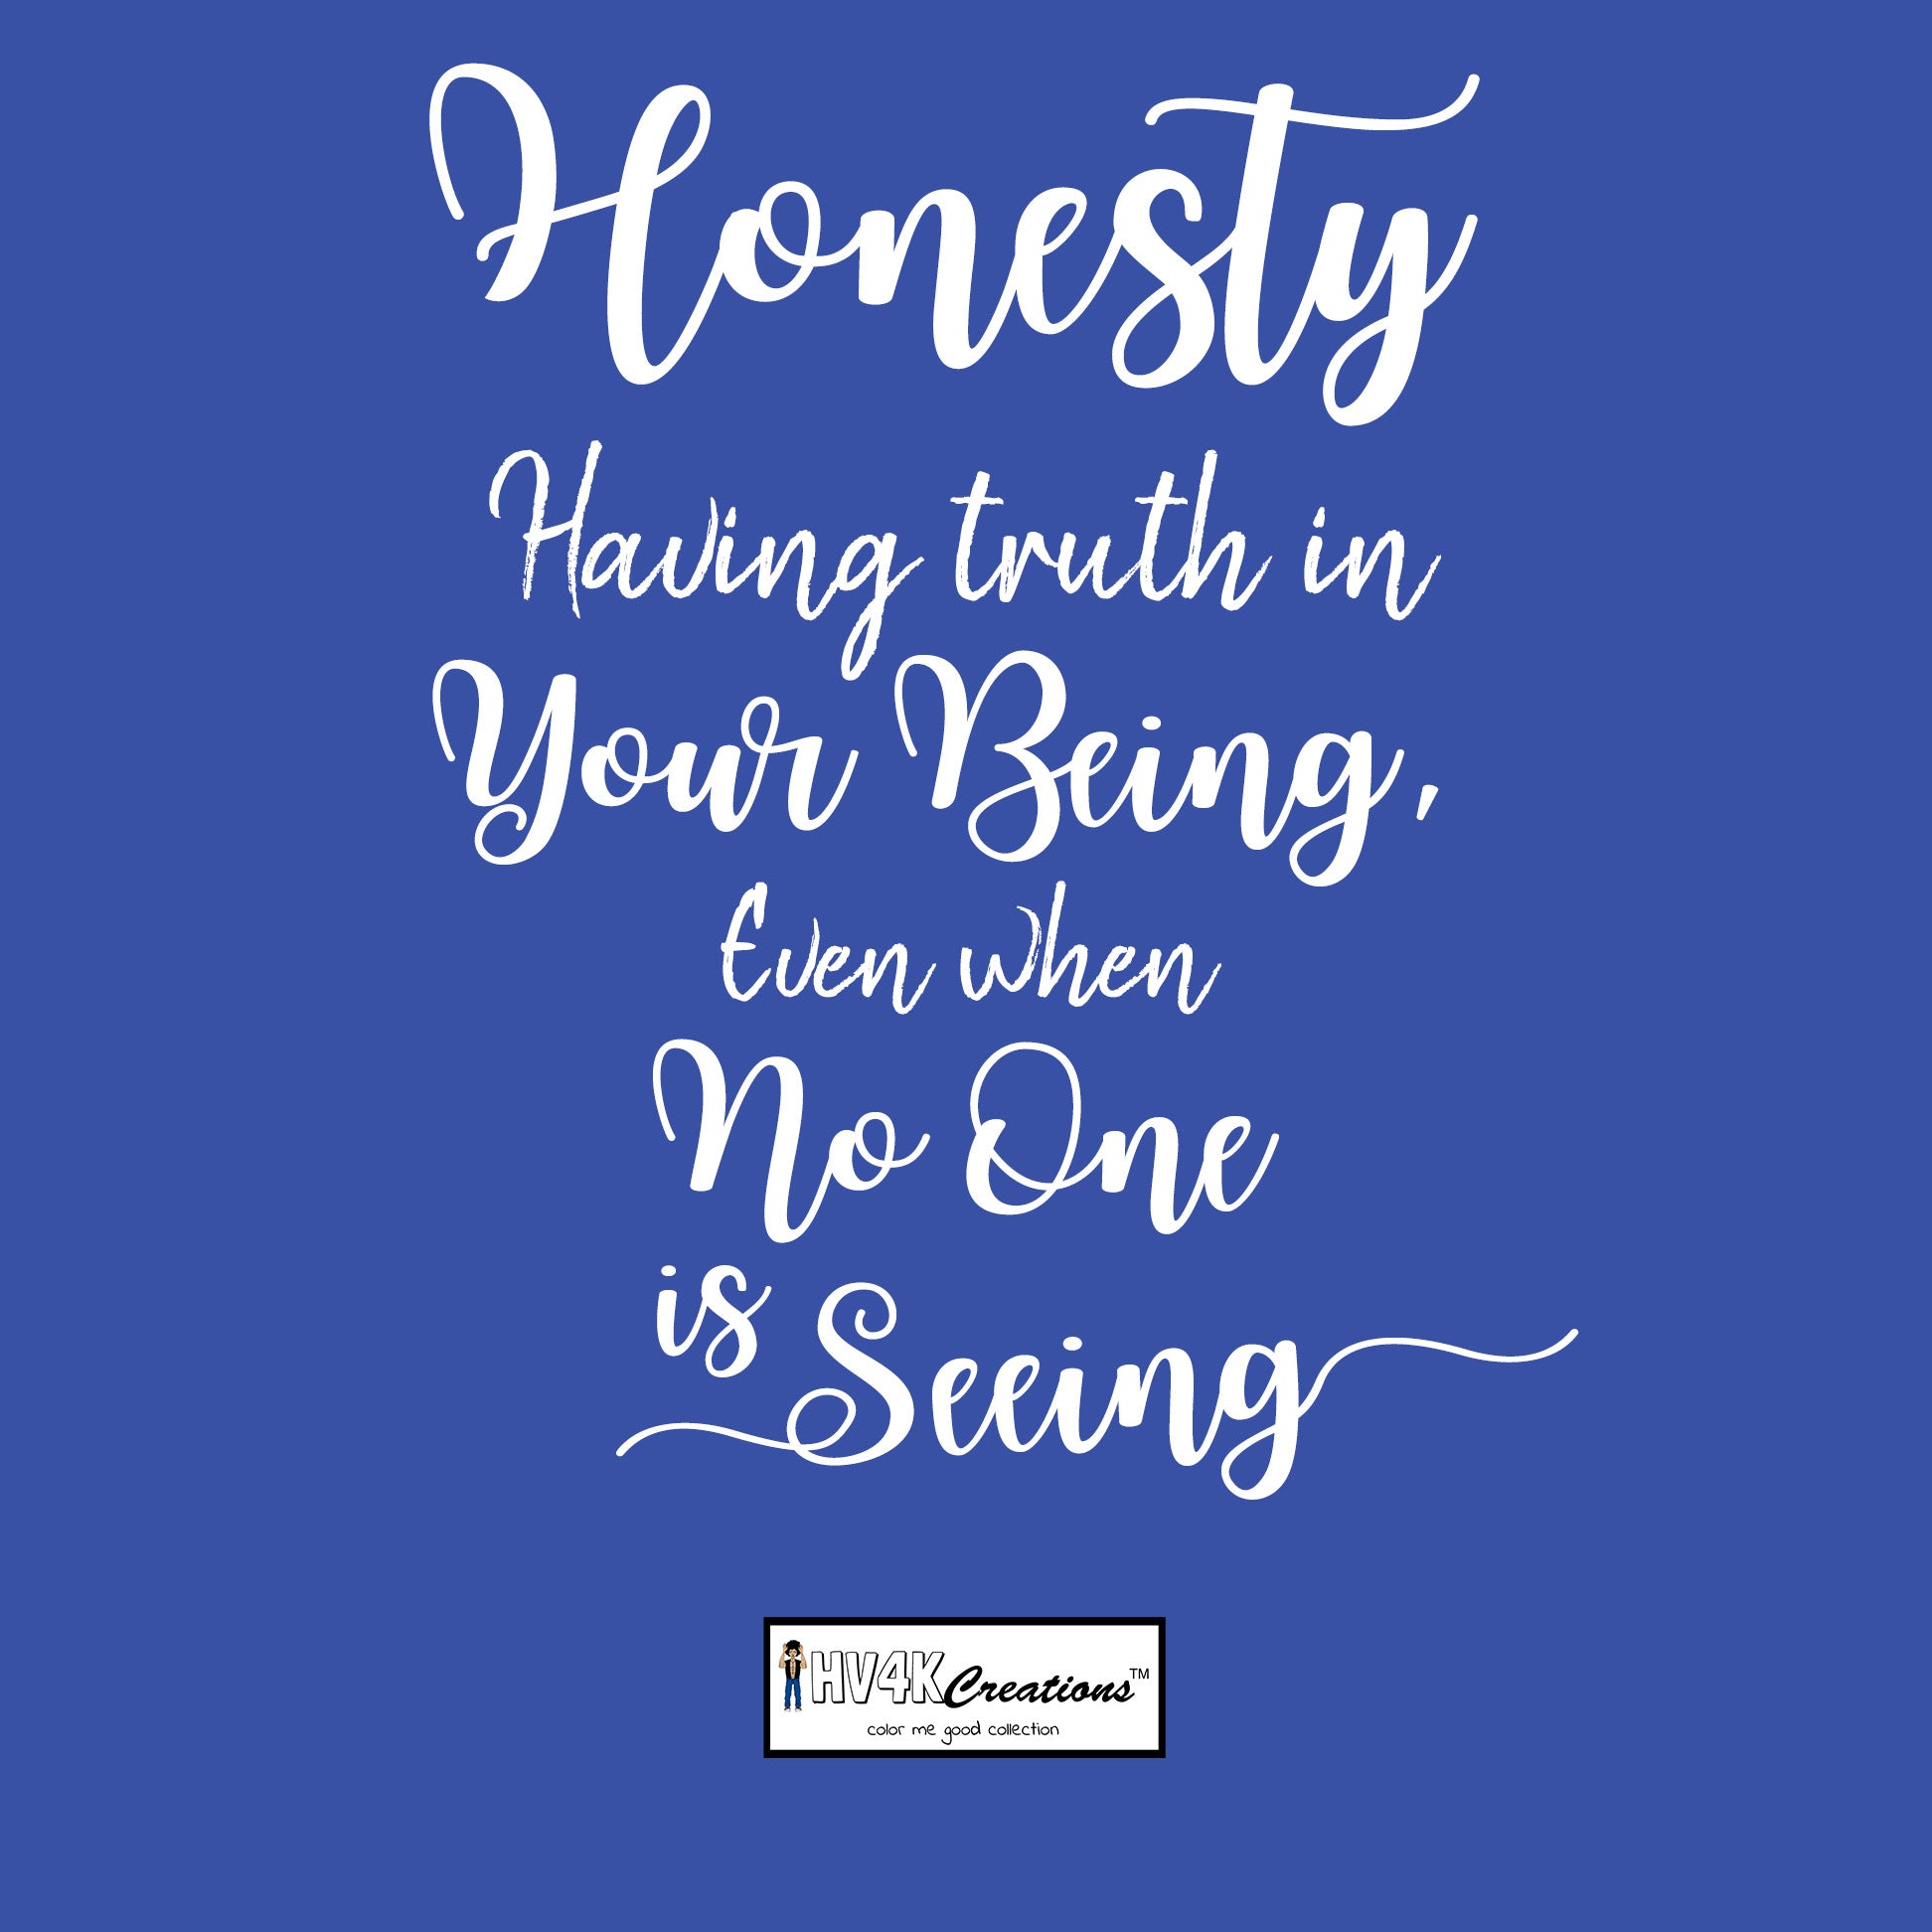 honesty rhyme picture